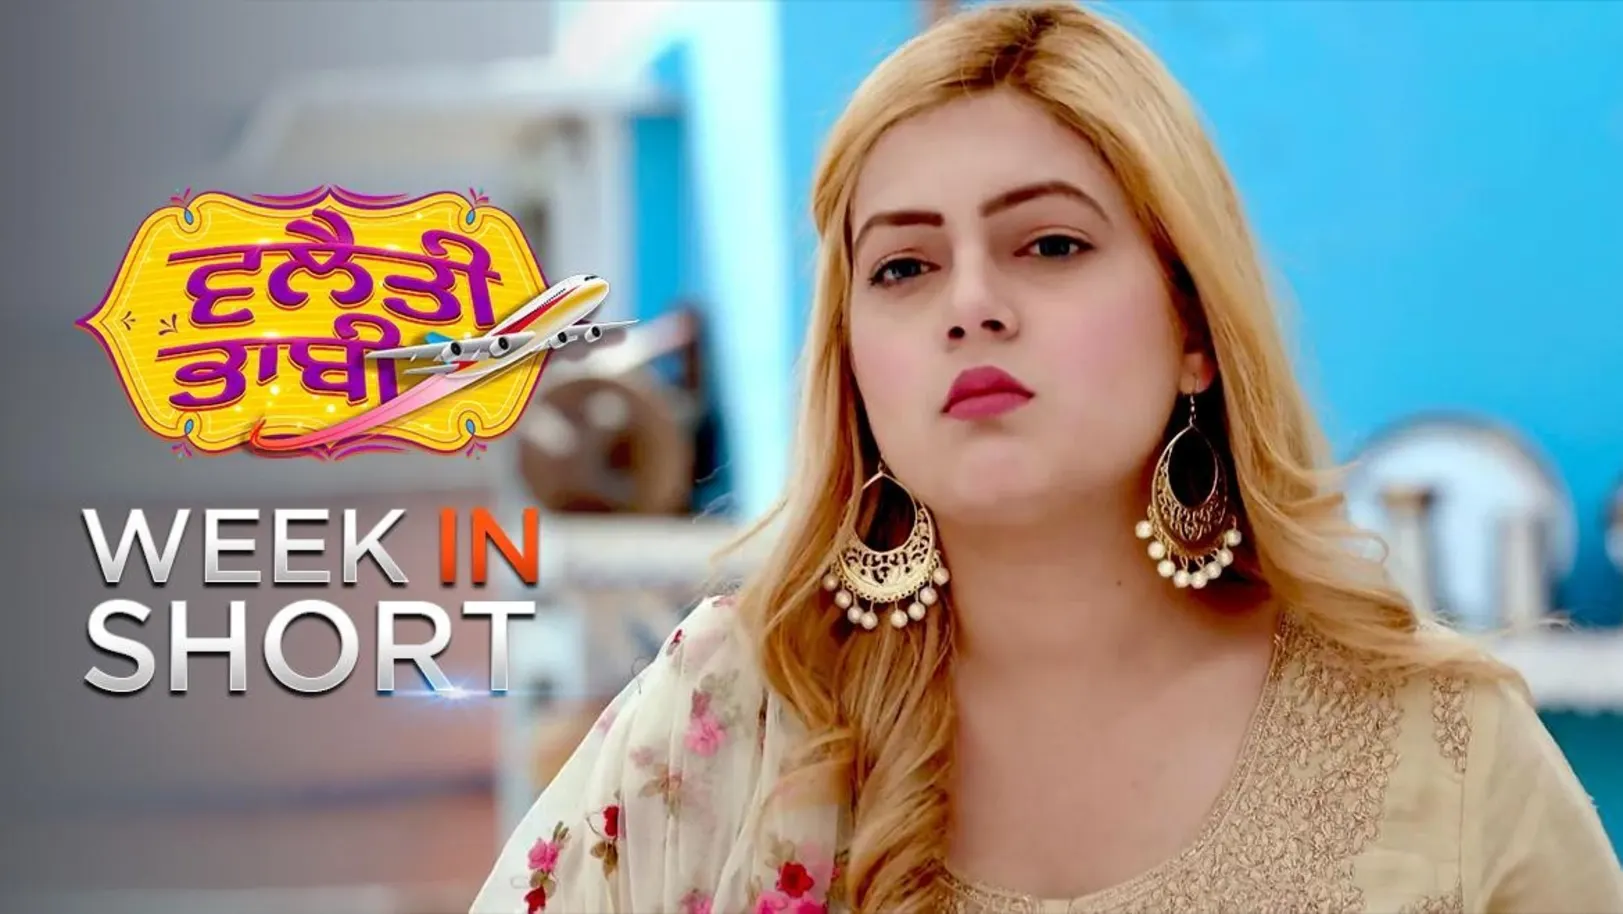 Week in Short - Vilayti Bhabhi - March 23, 2020 to March 27, 2020 28th March 2020 Webisode